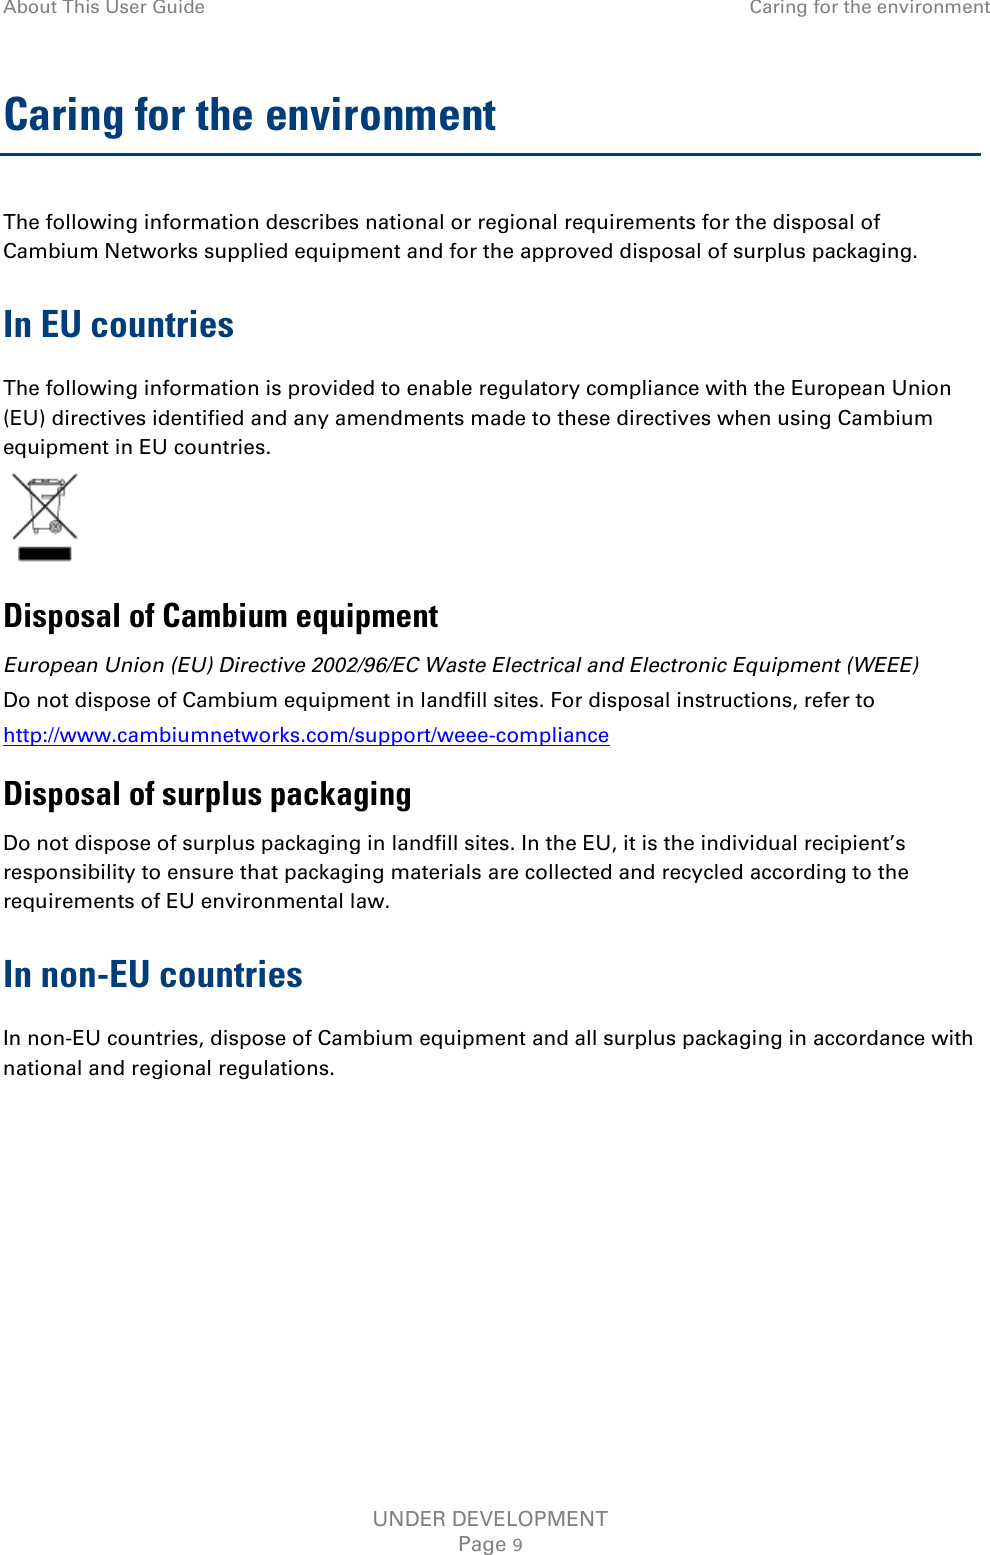 About This User Guide Caring for the environment  Caring for the environment The following information describes national or regional requirements for the disposal of Cambium Networks supplied equipment and for the approved disposal of surplus packaging. In EU countries The following information is provided to enable regulatory compliance with the European Union (EU) directives identified and any amendments made to these directives when using Cambium equipment in EU countries.  Disposal of Cambium equipment European Union (EU) Directive 2002/96/EC Waste Electrical and Electronic Equipment (WEEE) Do not dispose of Cambium equipment in landfill sites. For disposal instructions, refer to  http://www.cambiumnetworks.com/support/weee-compliance Disposal of surplus packaging Do not dispose of surplus packaging in landfill sites. In the EU, it is the individual recipient’s responsibility to ensure that packaging materials are collected and recycled according to the requirements of EU environmental law. In non-EU countries In non-EU countries, dispose of Cambium equipment and all surplus packaging in accordance with national and regional regulations.   UNDER DEVELOPMENT Page 9 